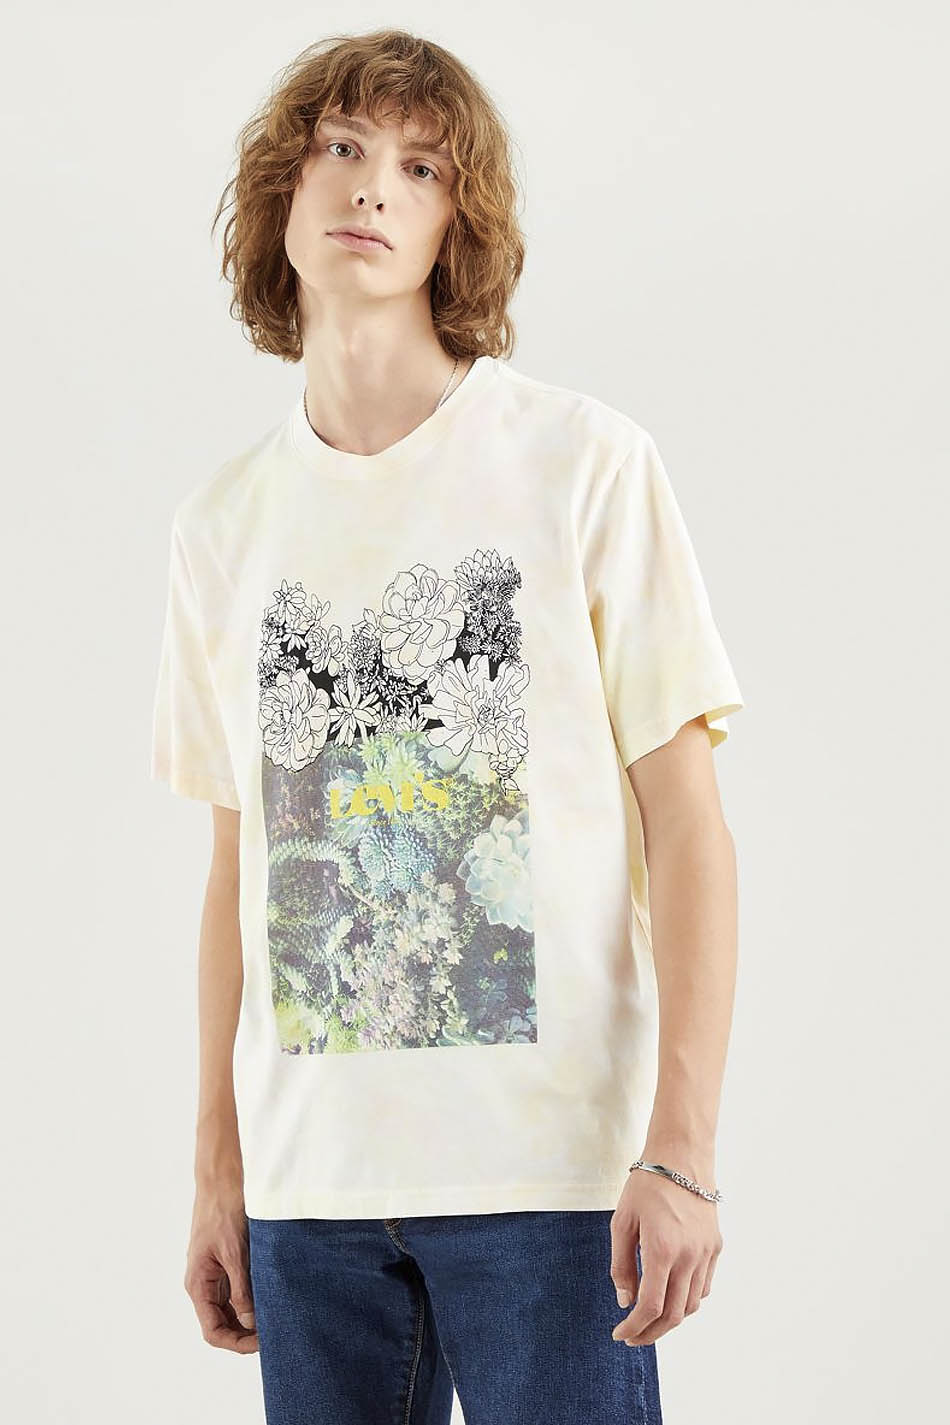 Camiseta Levi's Relaxed Fit Floral